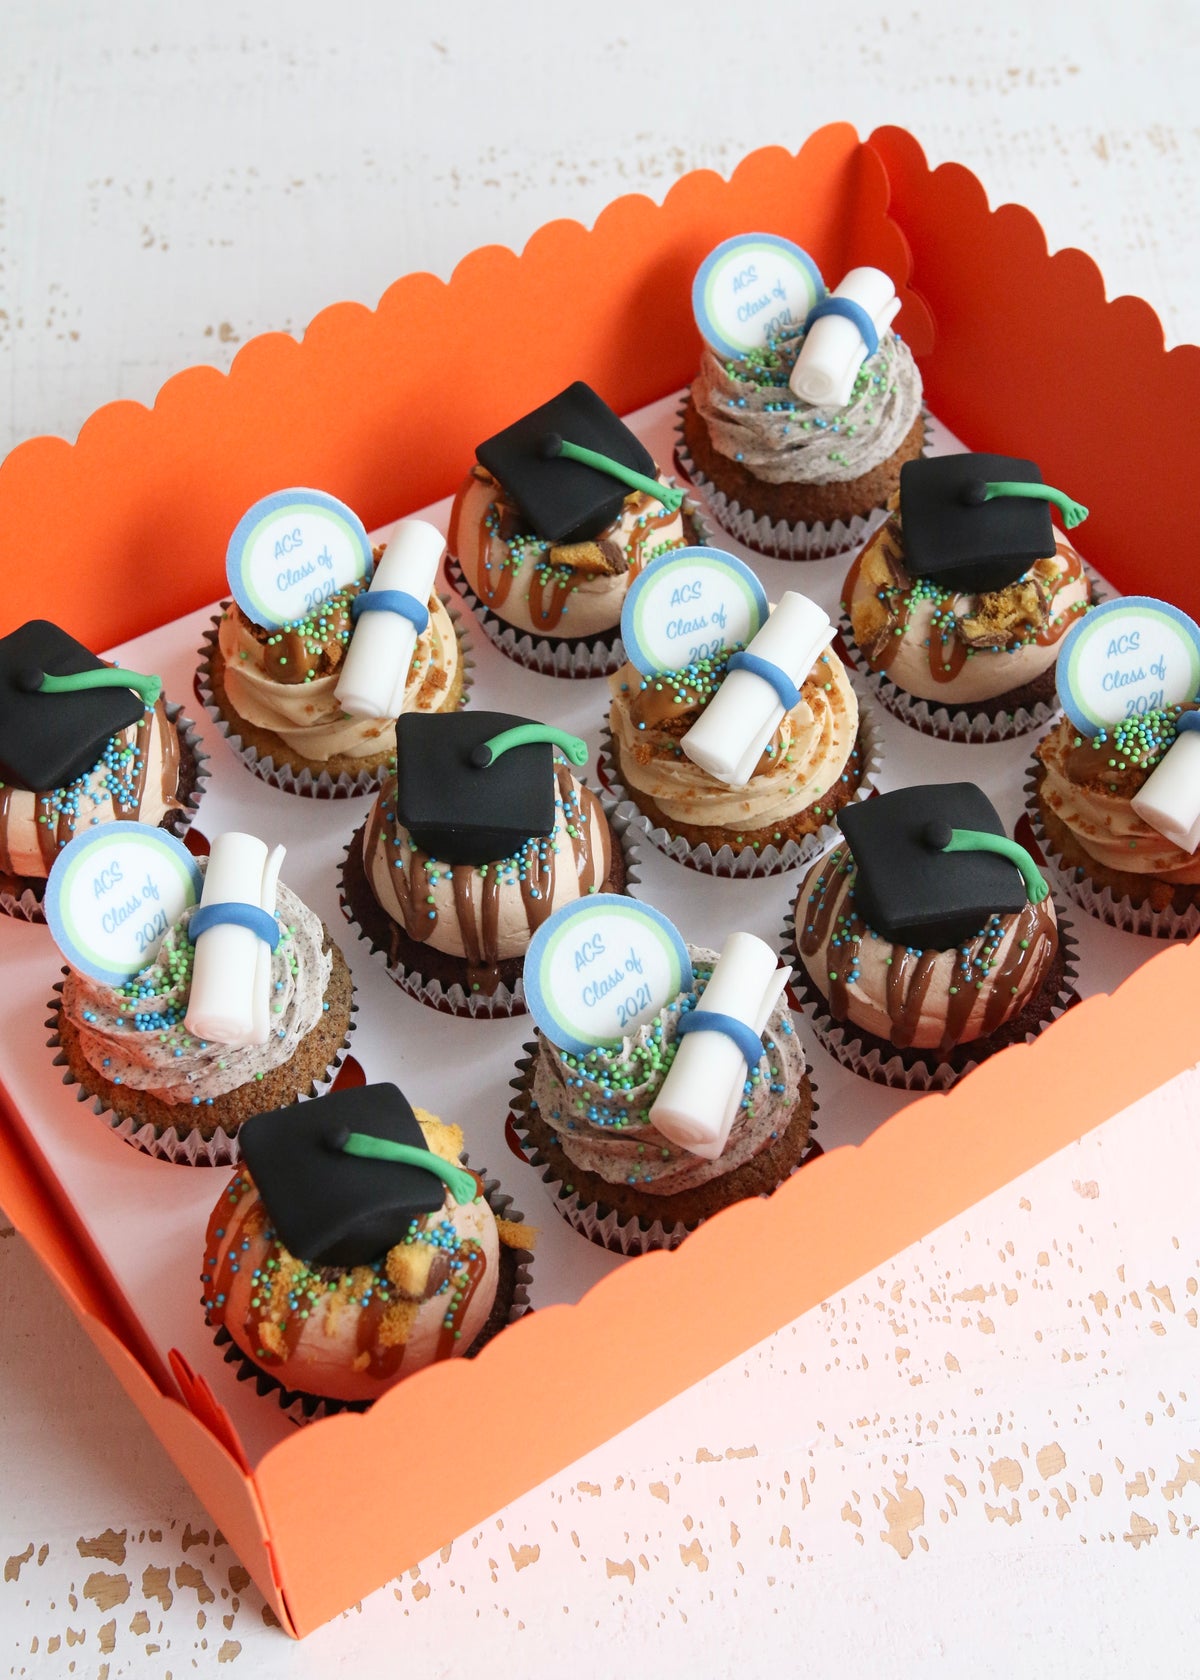 Box of Graduation Cupcakes with caps and scrolls